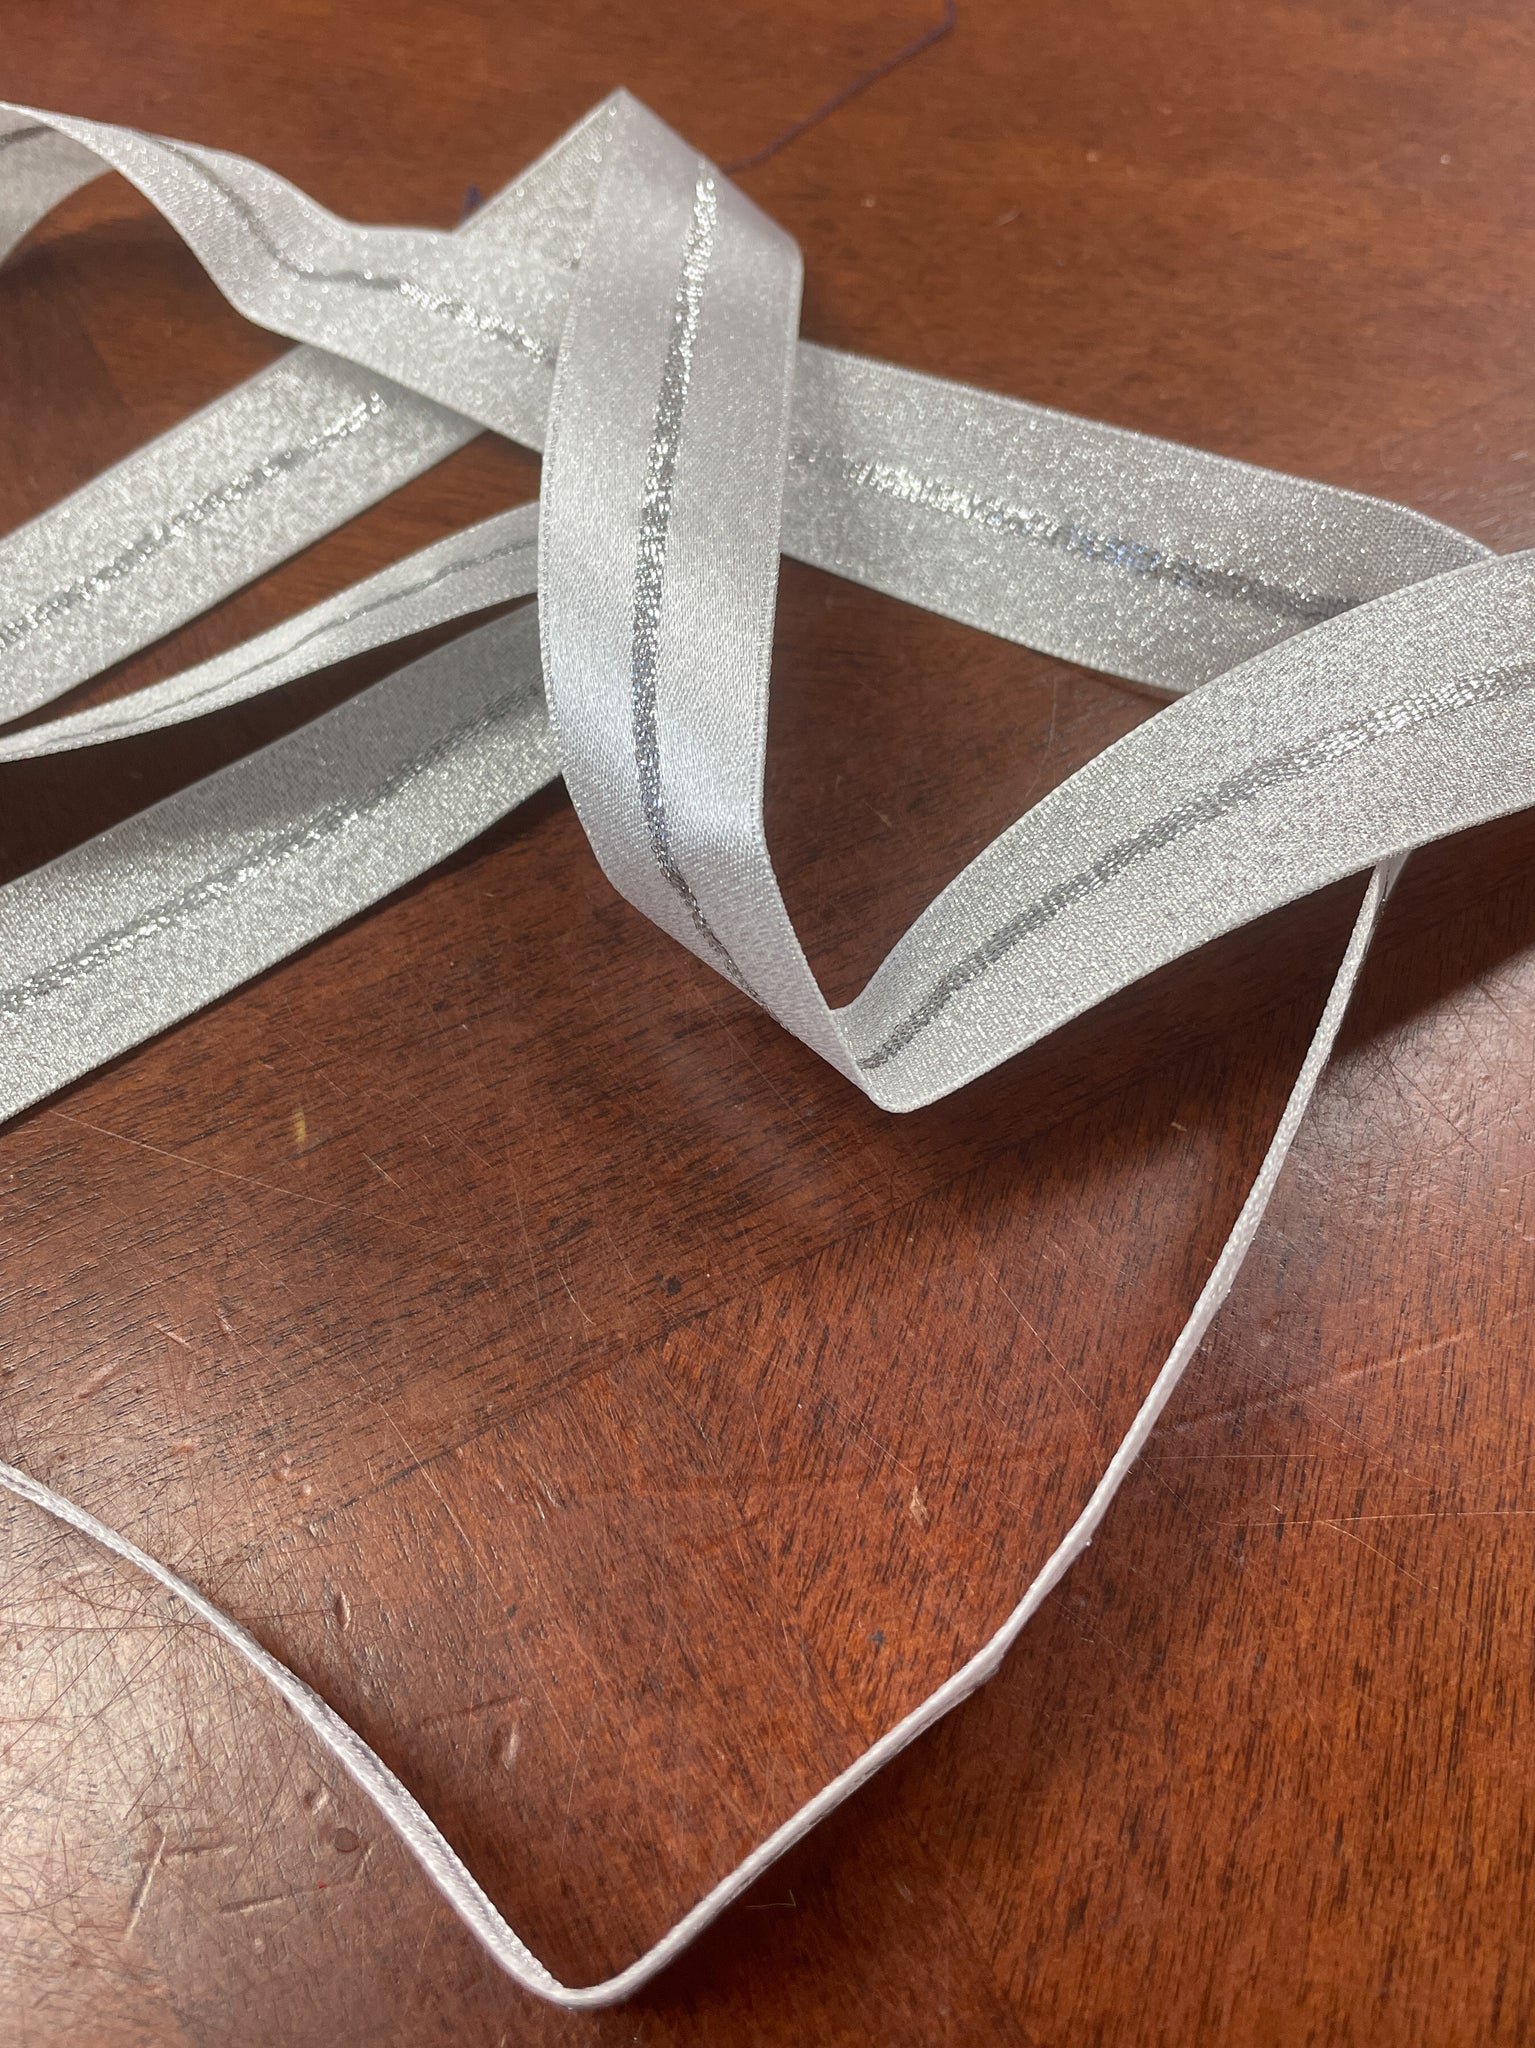 2 7/8 YD Polyester/Metallic Double Faced Ribbon - Silver Satin with Silver Lurex Stripe